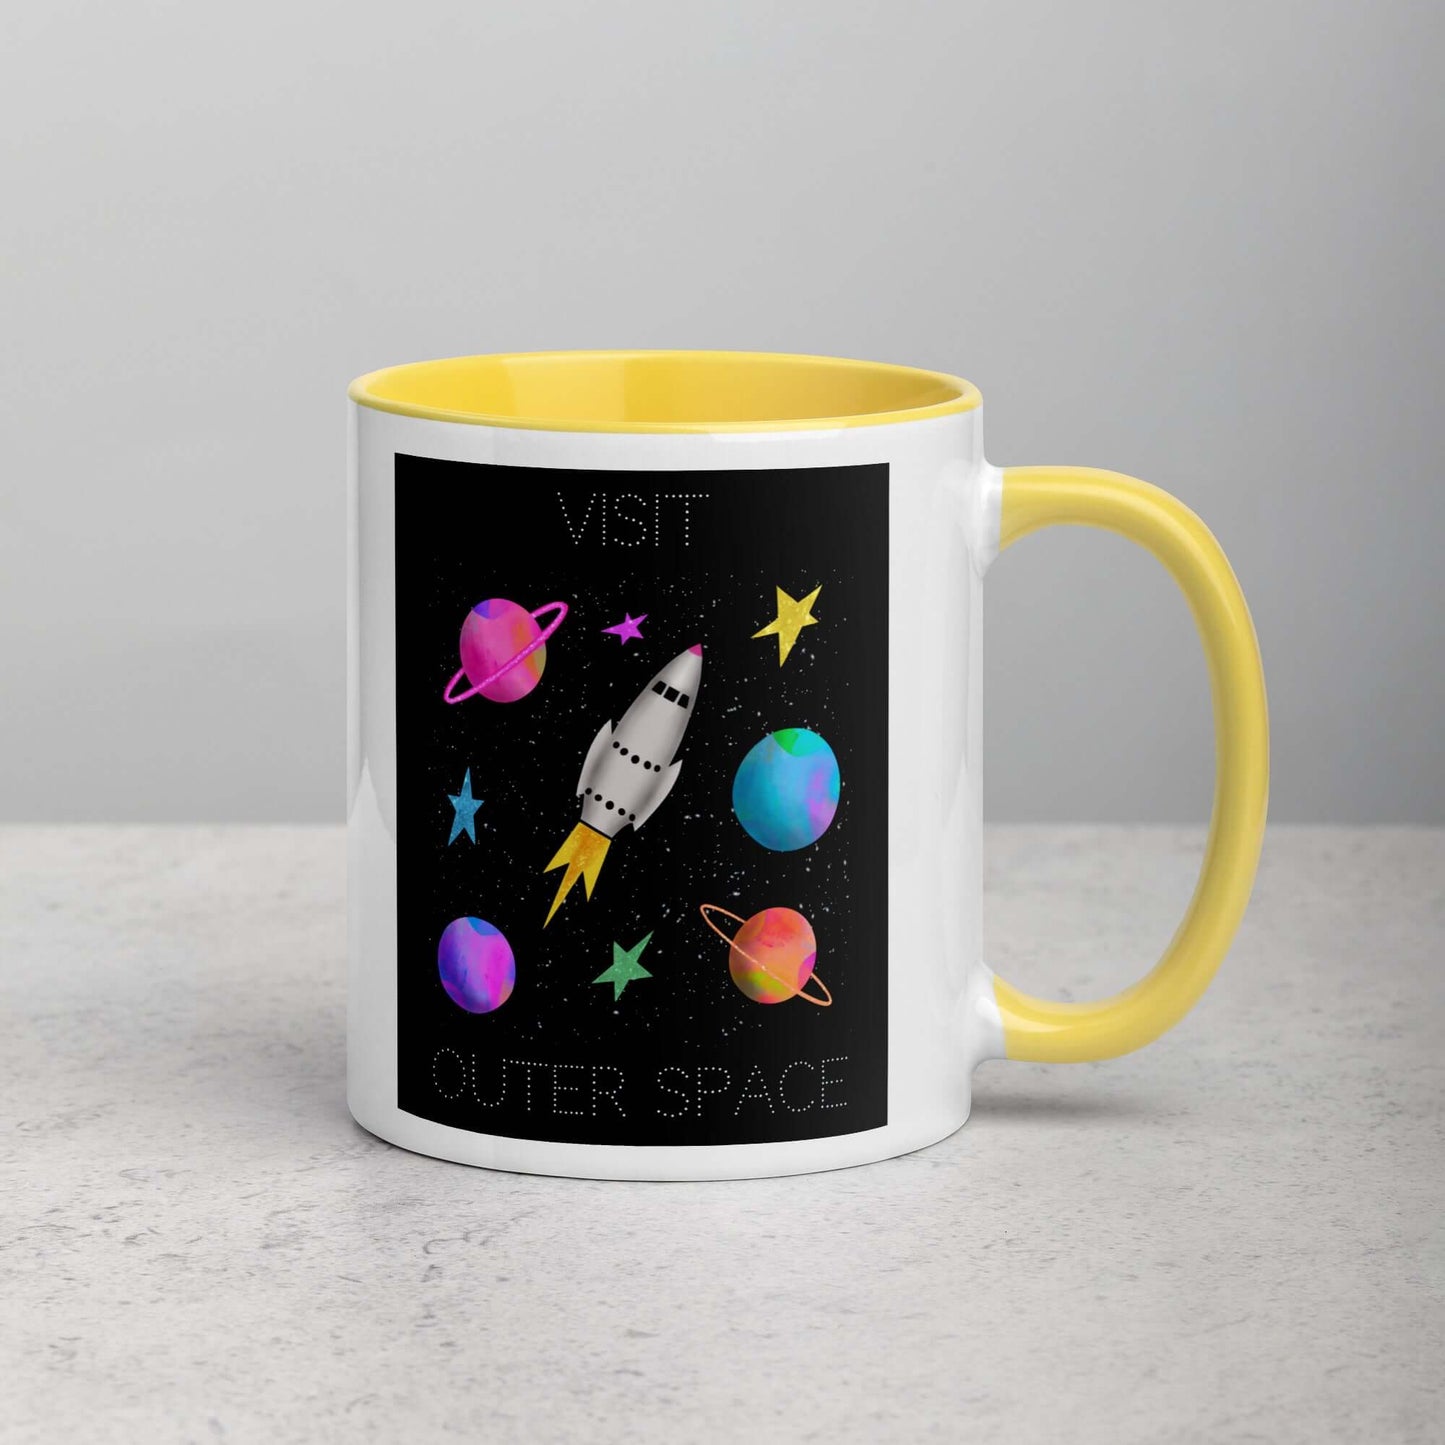 Whimsical Space Rocket with Colorful Planets and Stars on Black Background with Text “Visit Outer Space” Mug with Bright Yellow Color Inside Right Handed Front View